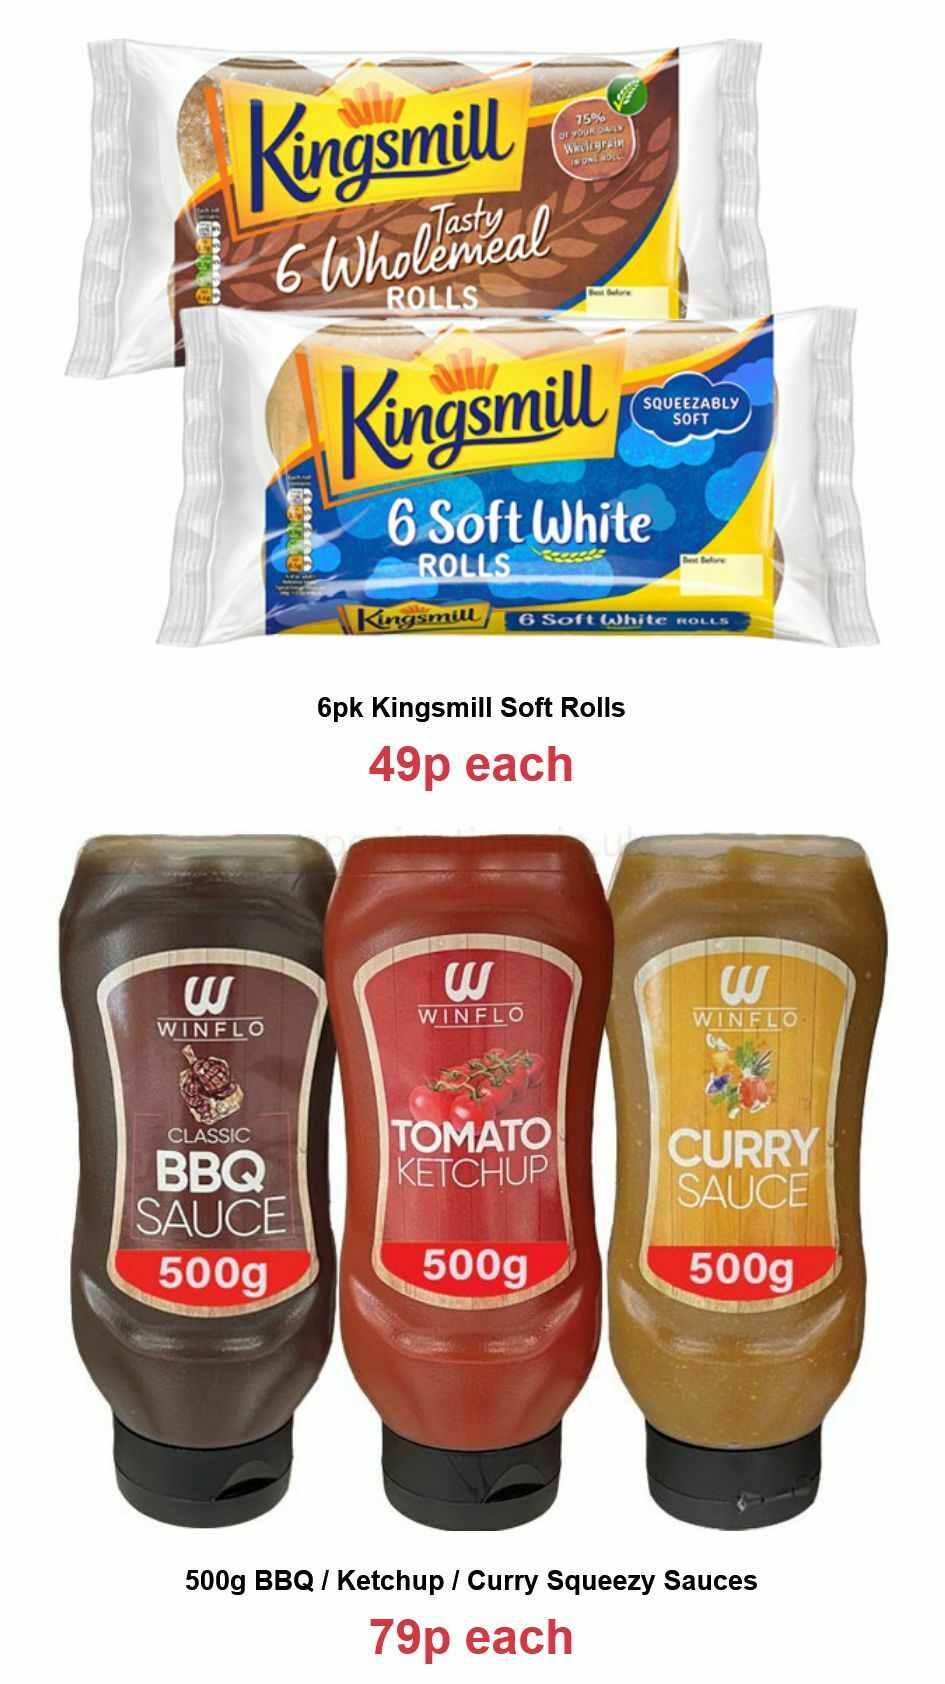 Farmfoods Offers from 9 August